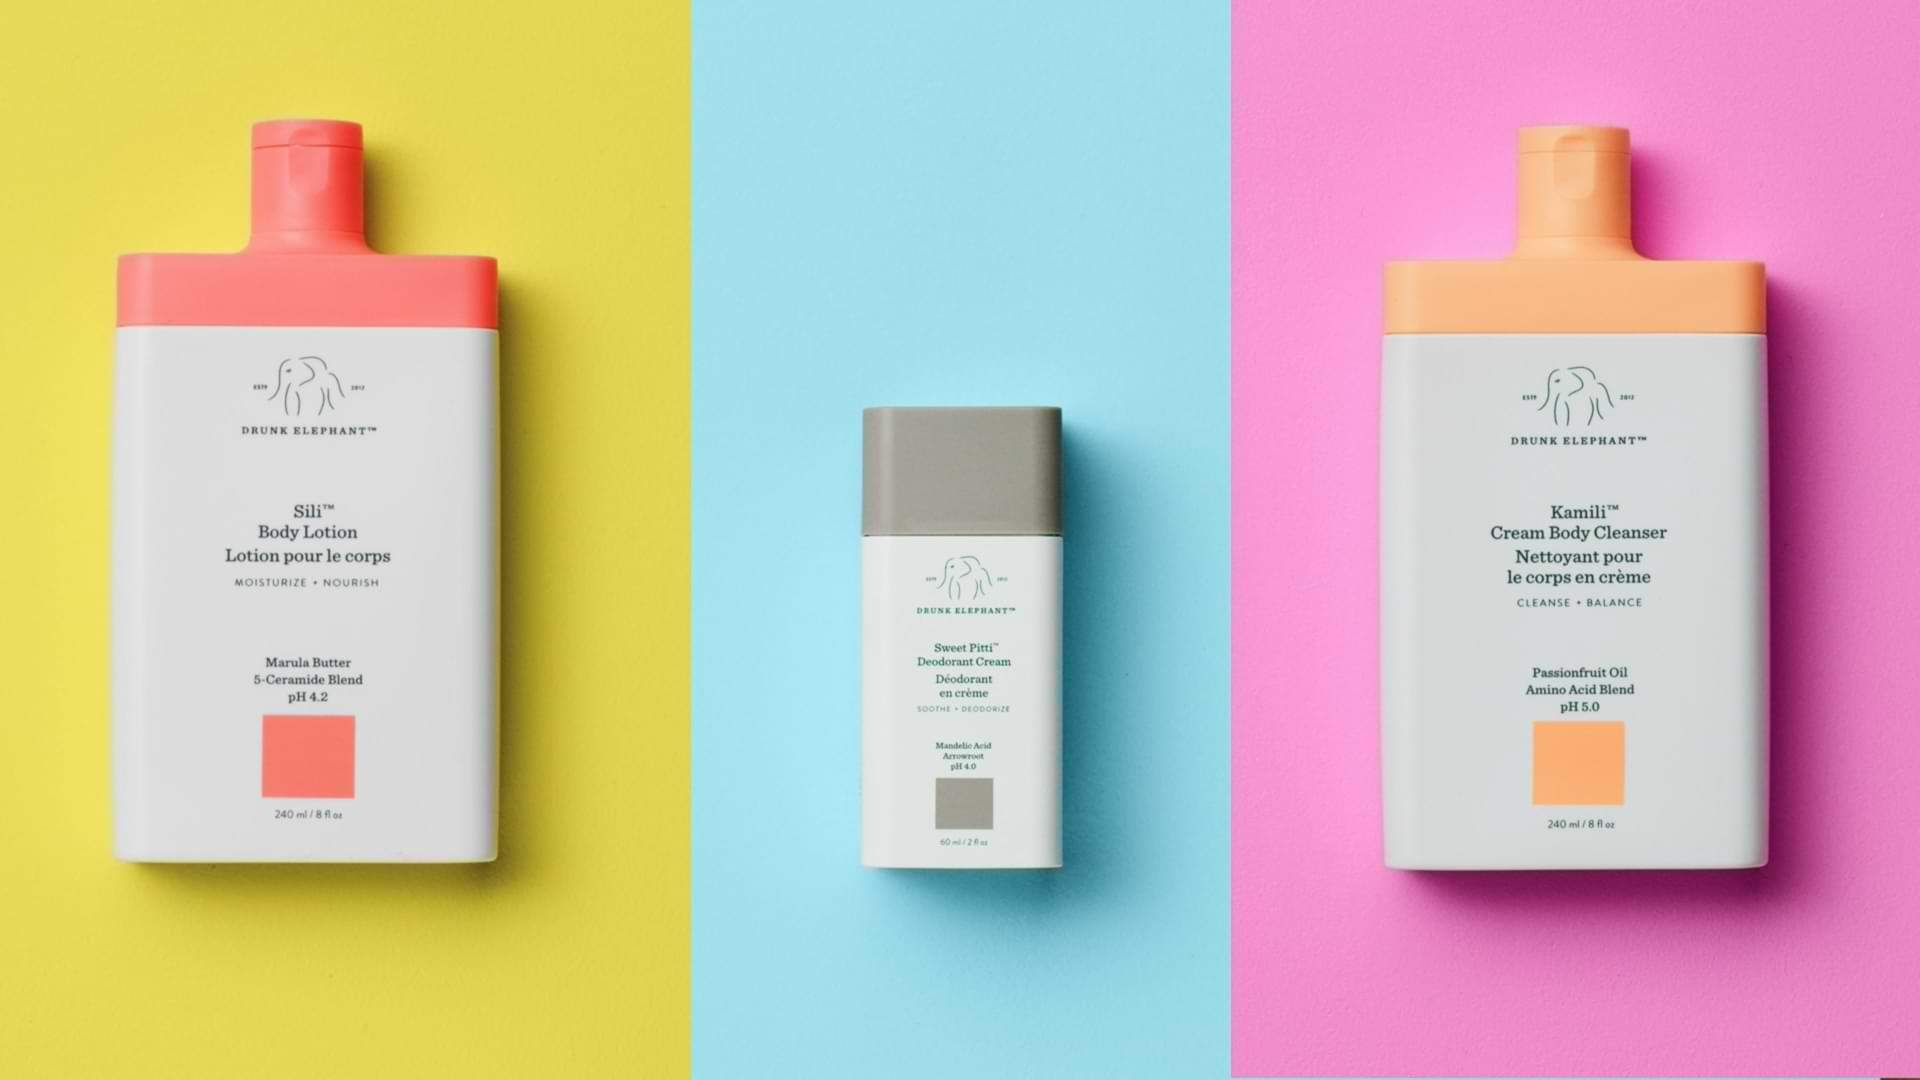 video introducing the body line of products from Drunk Elephant